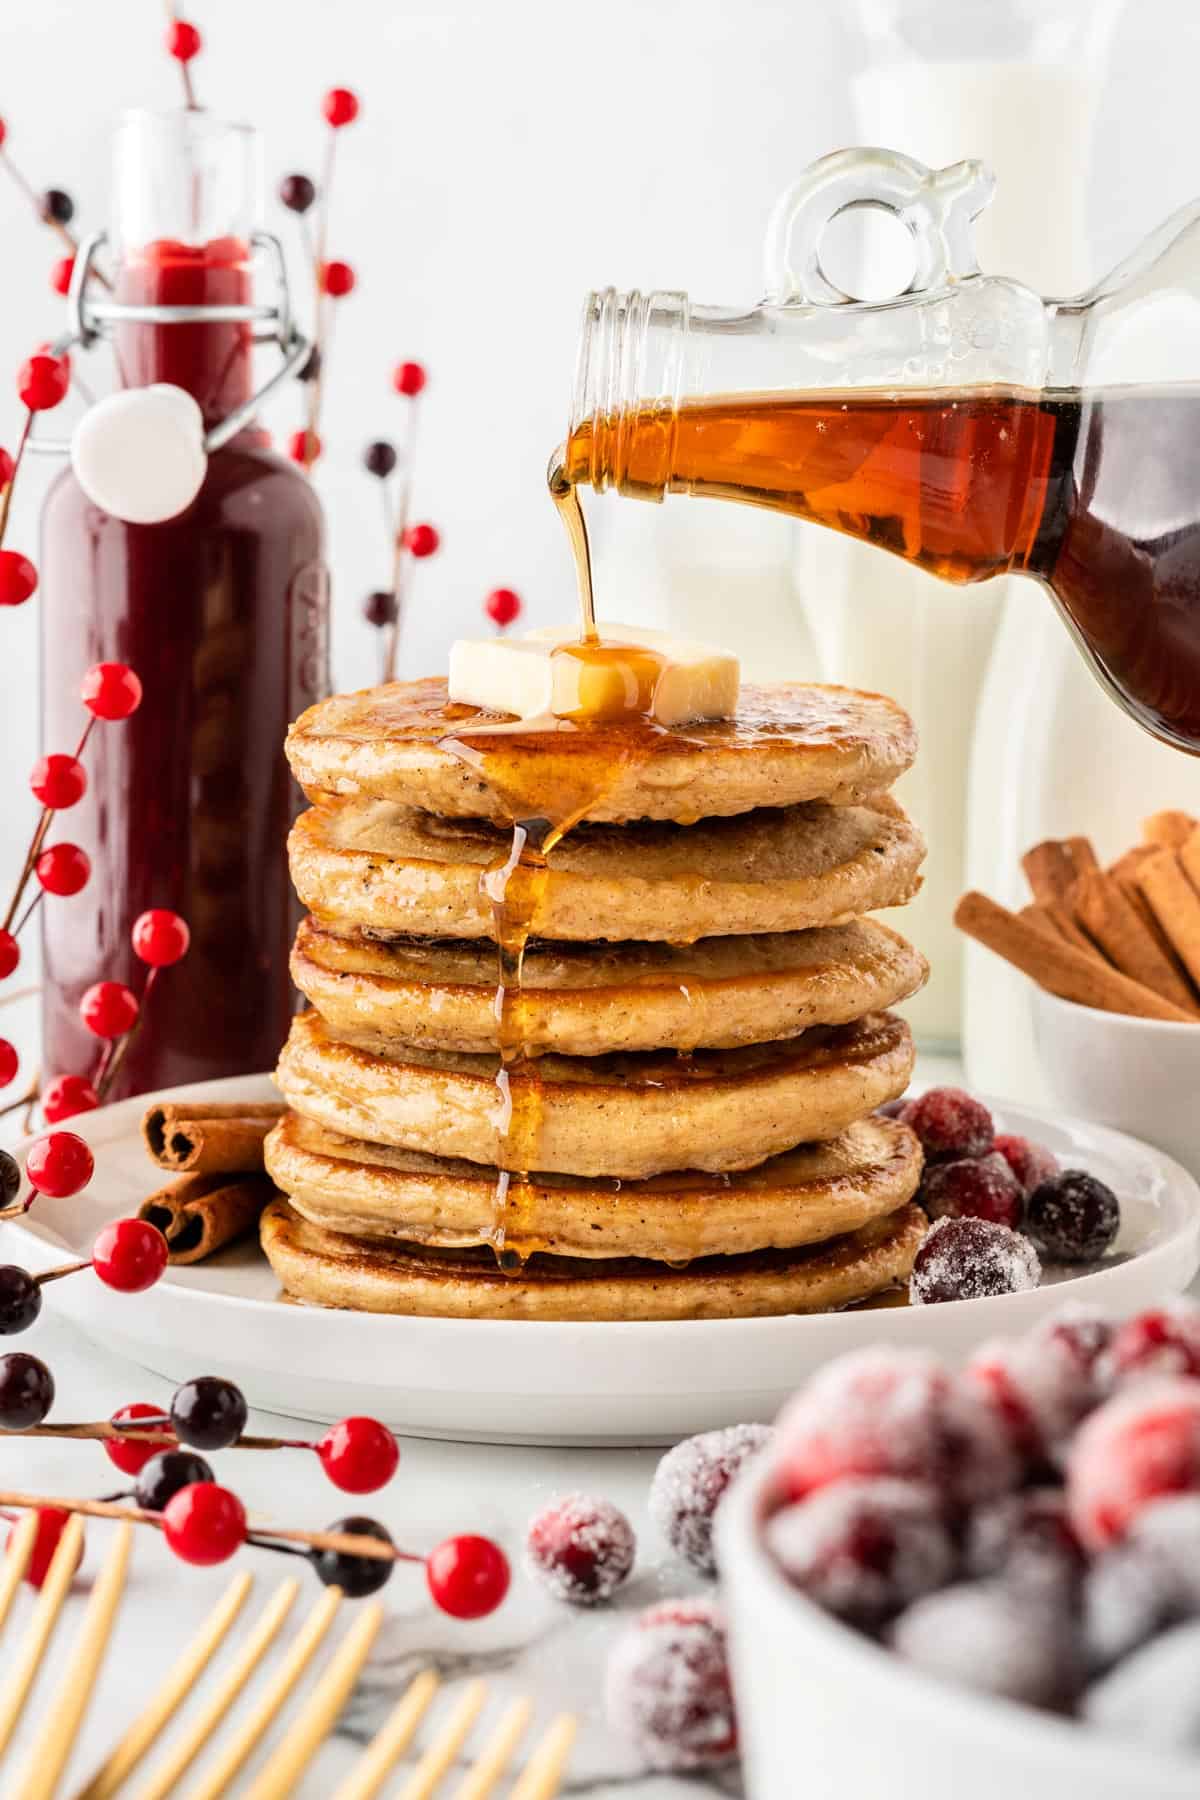 A photo of a stack of pancakes with maple syrup being poured on top.